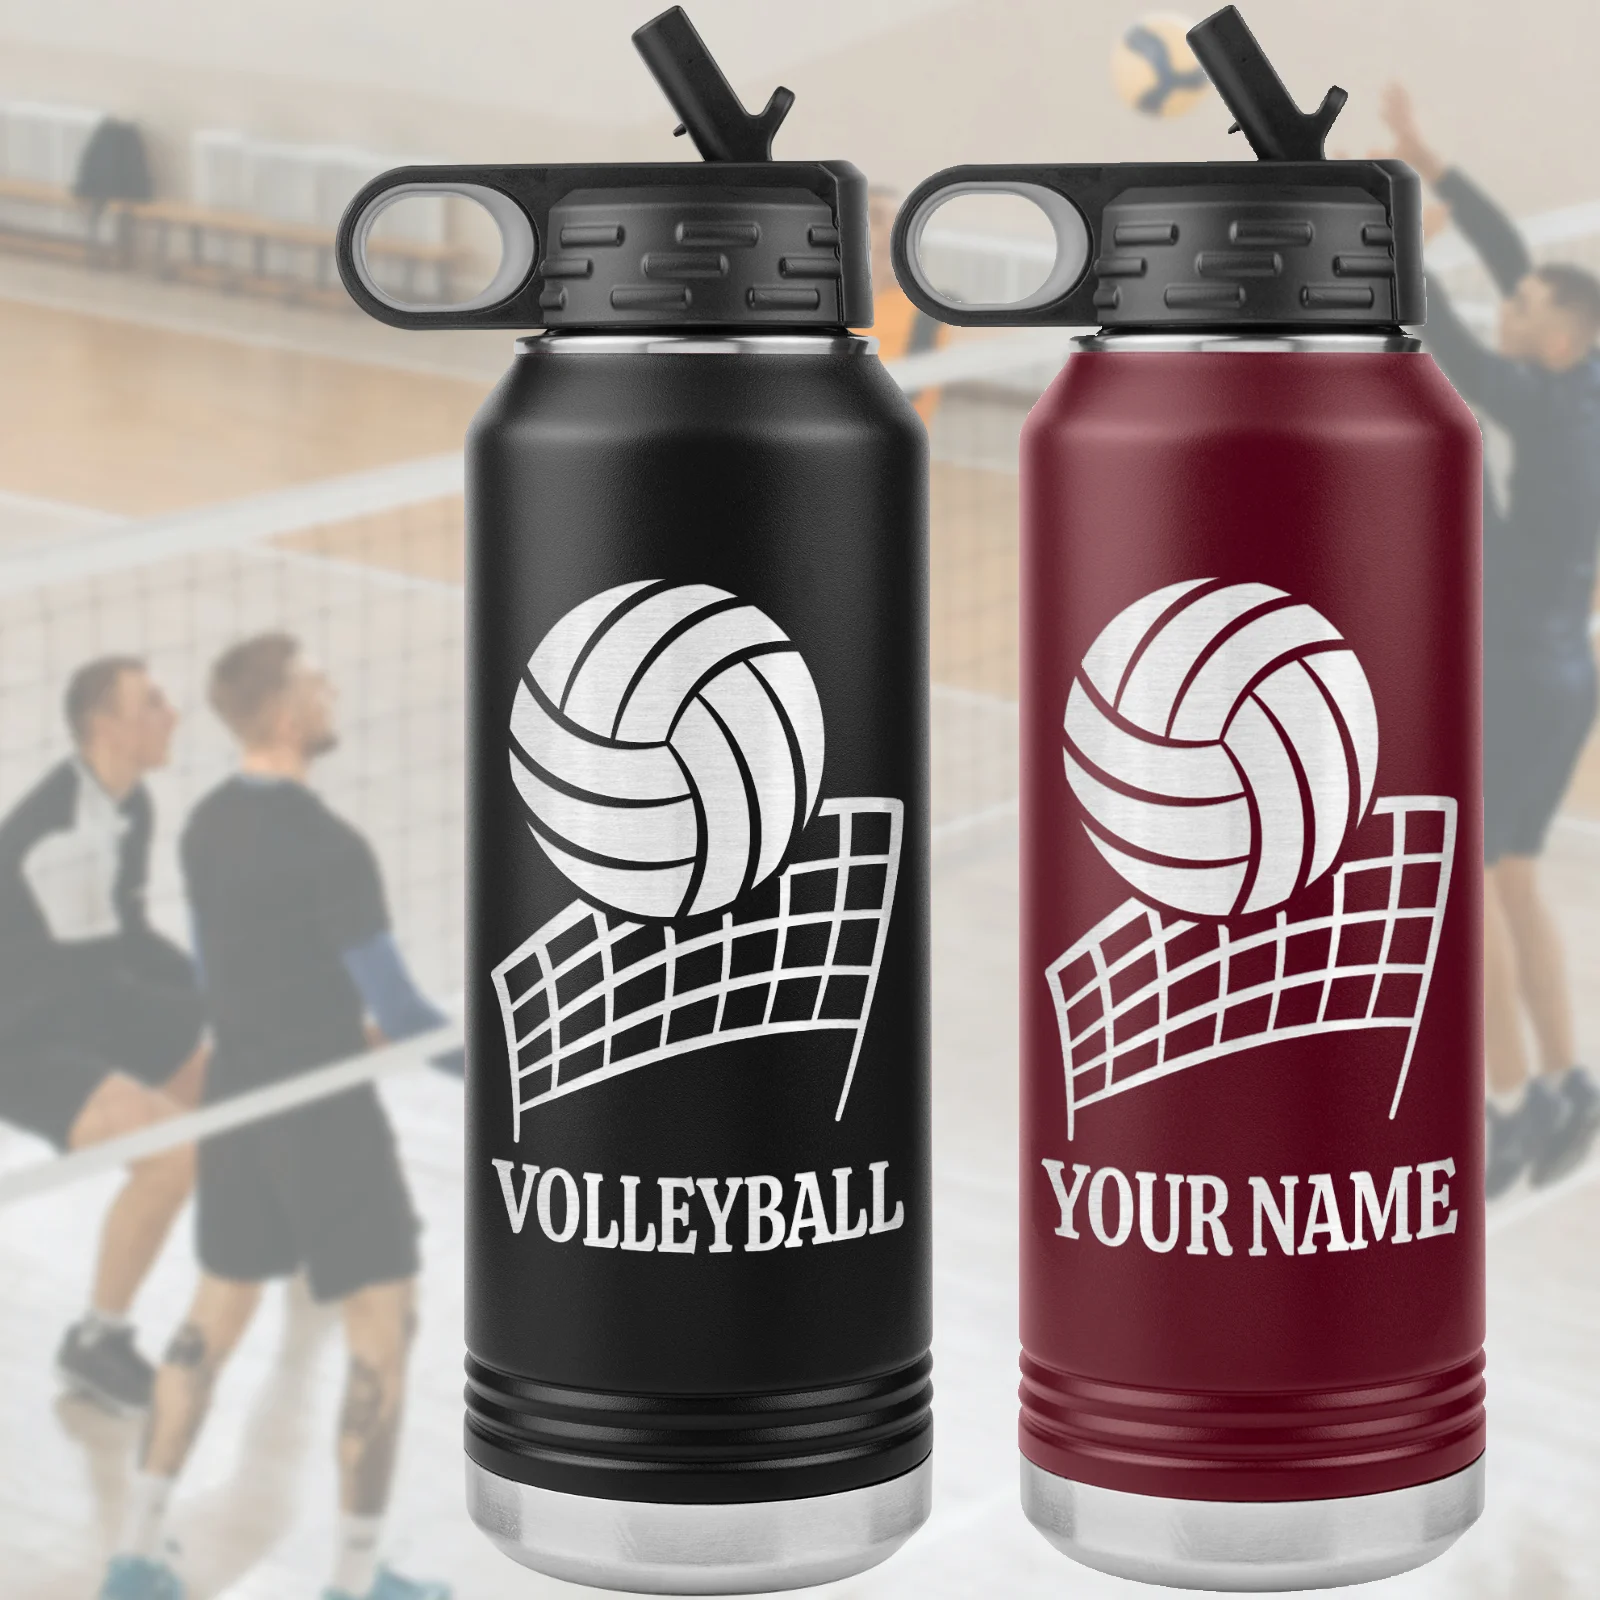 https://www.personalsportsgifts.com/wp-content/uploads/sites/7/2022/10/personalized-water-bottles-volelyball-gifts.jpg.webp